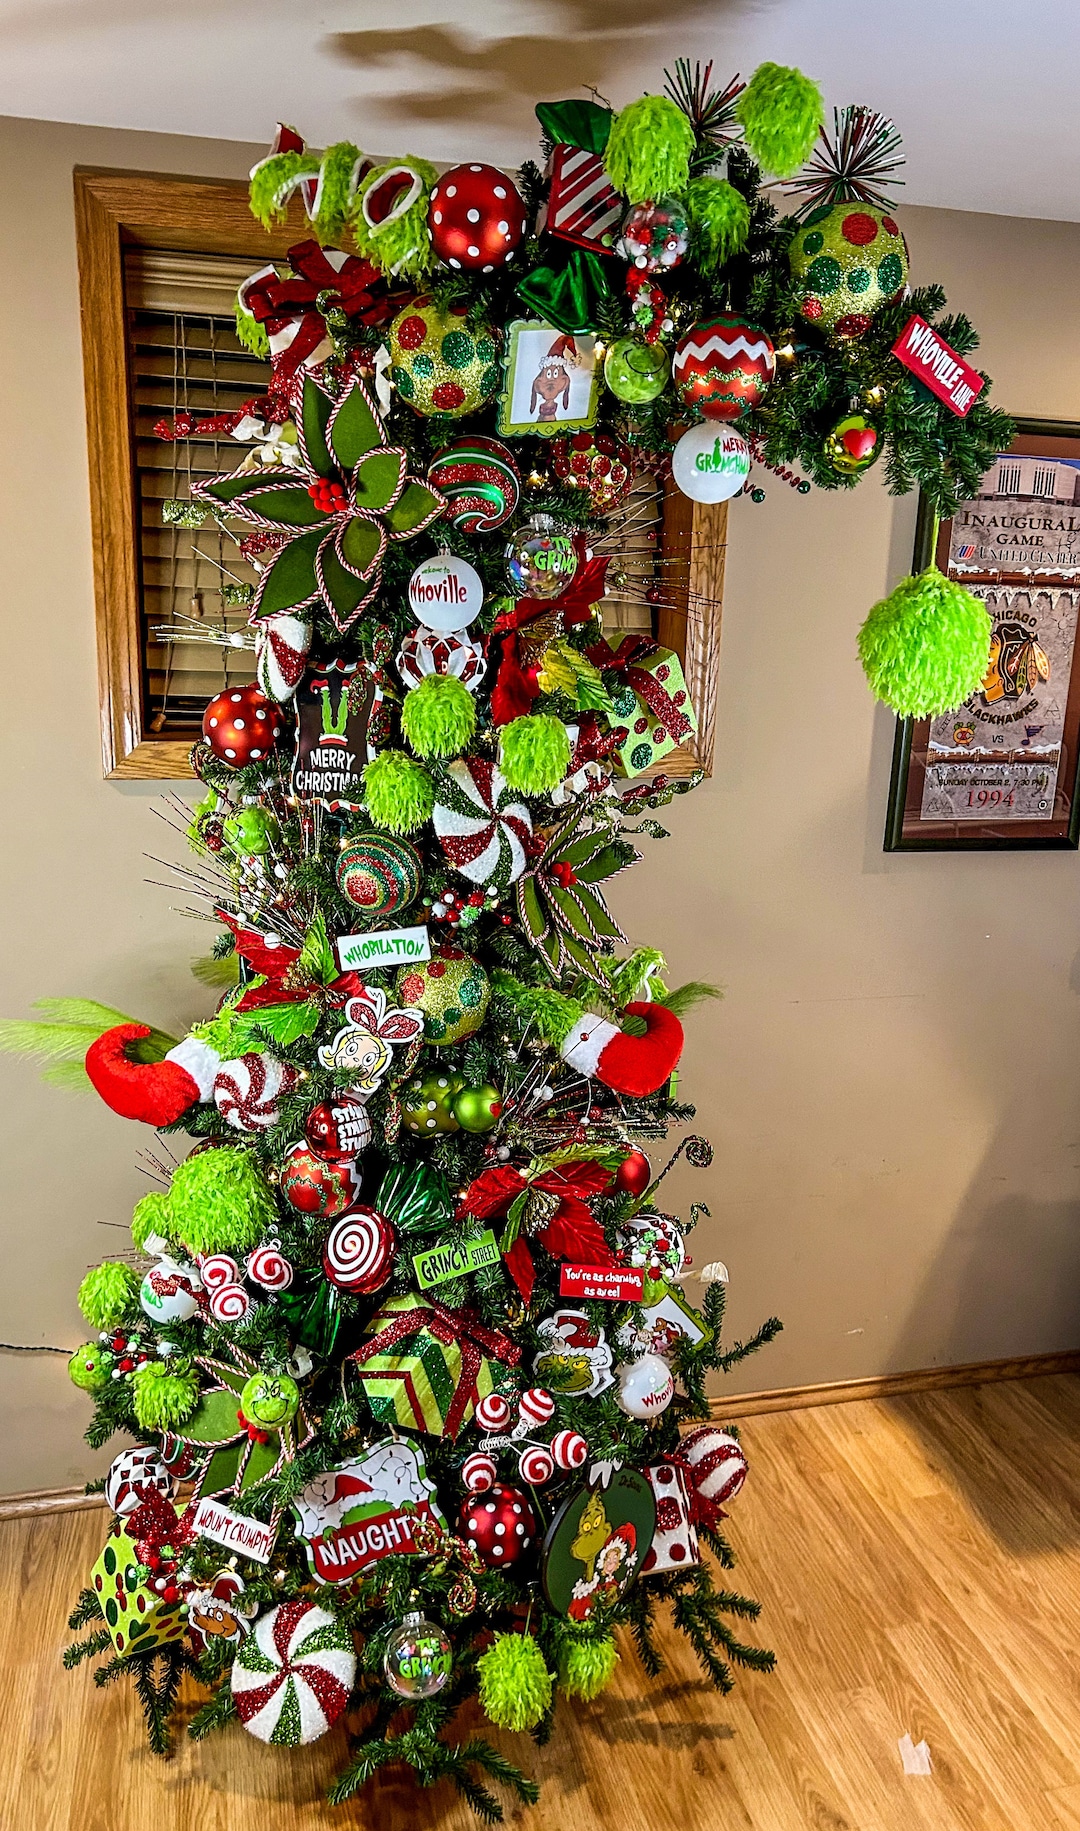 How To Decorate A Grinch Christmas Tree (With Links For The Decor)